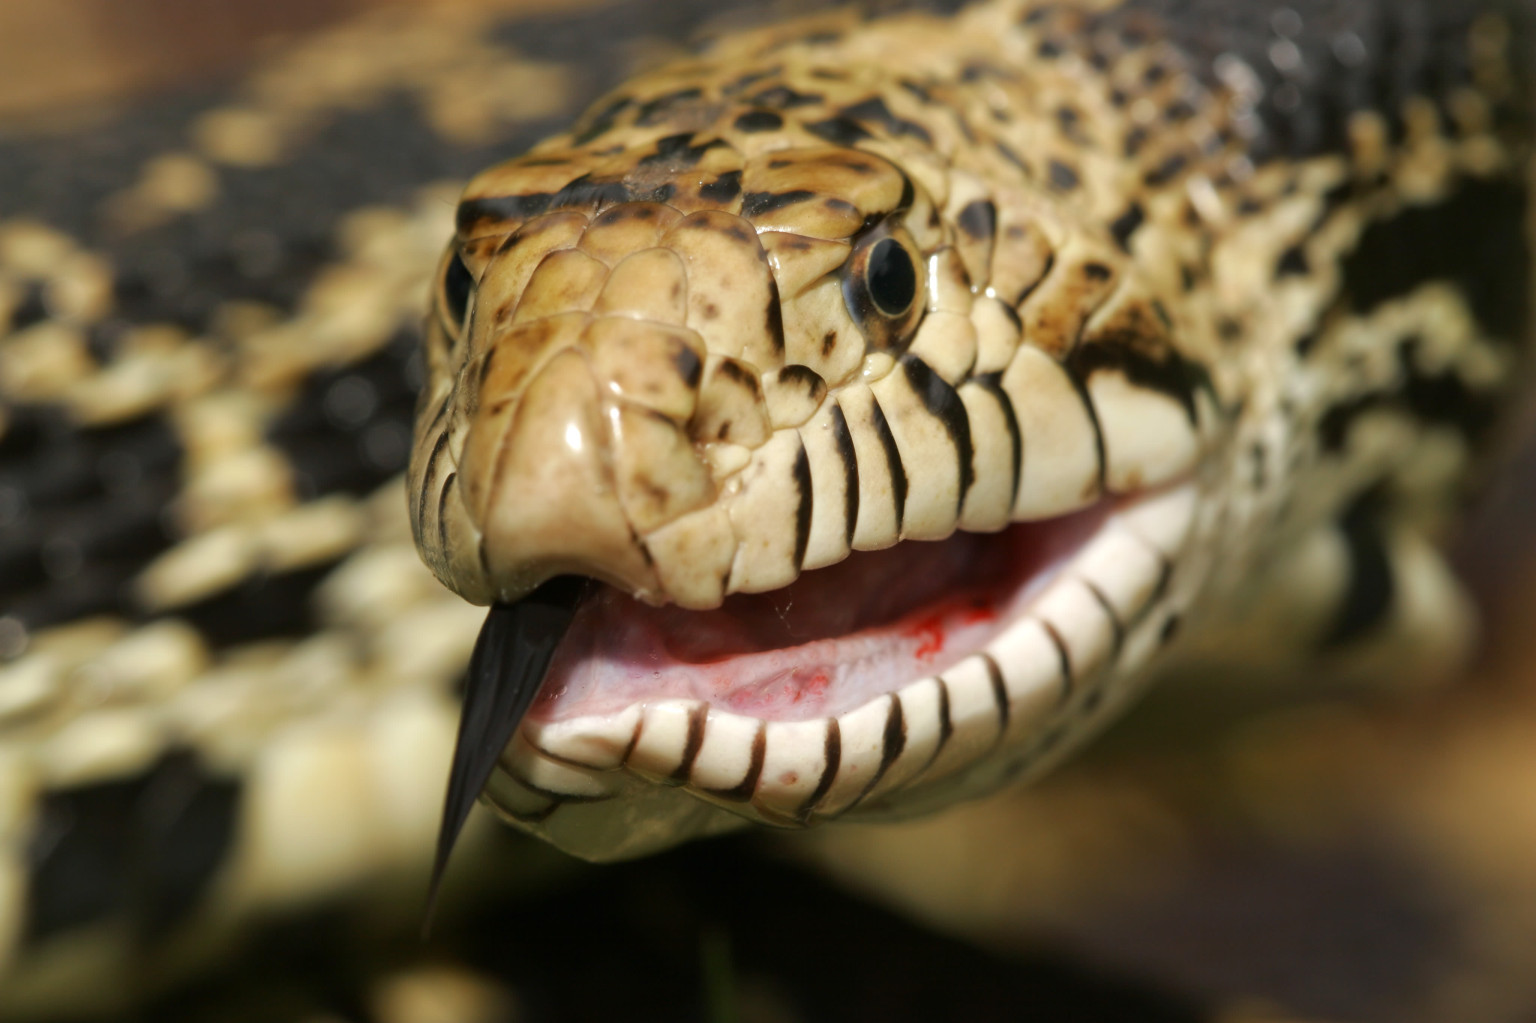 Canada's Biggest Snakes Are Under Surveillance